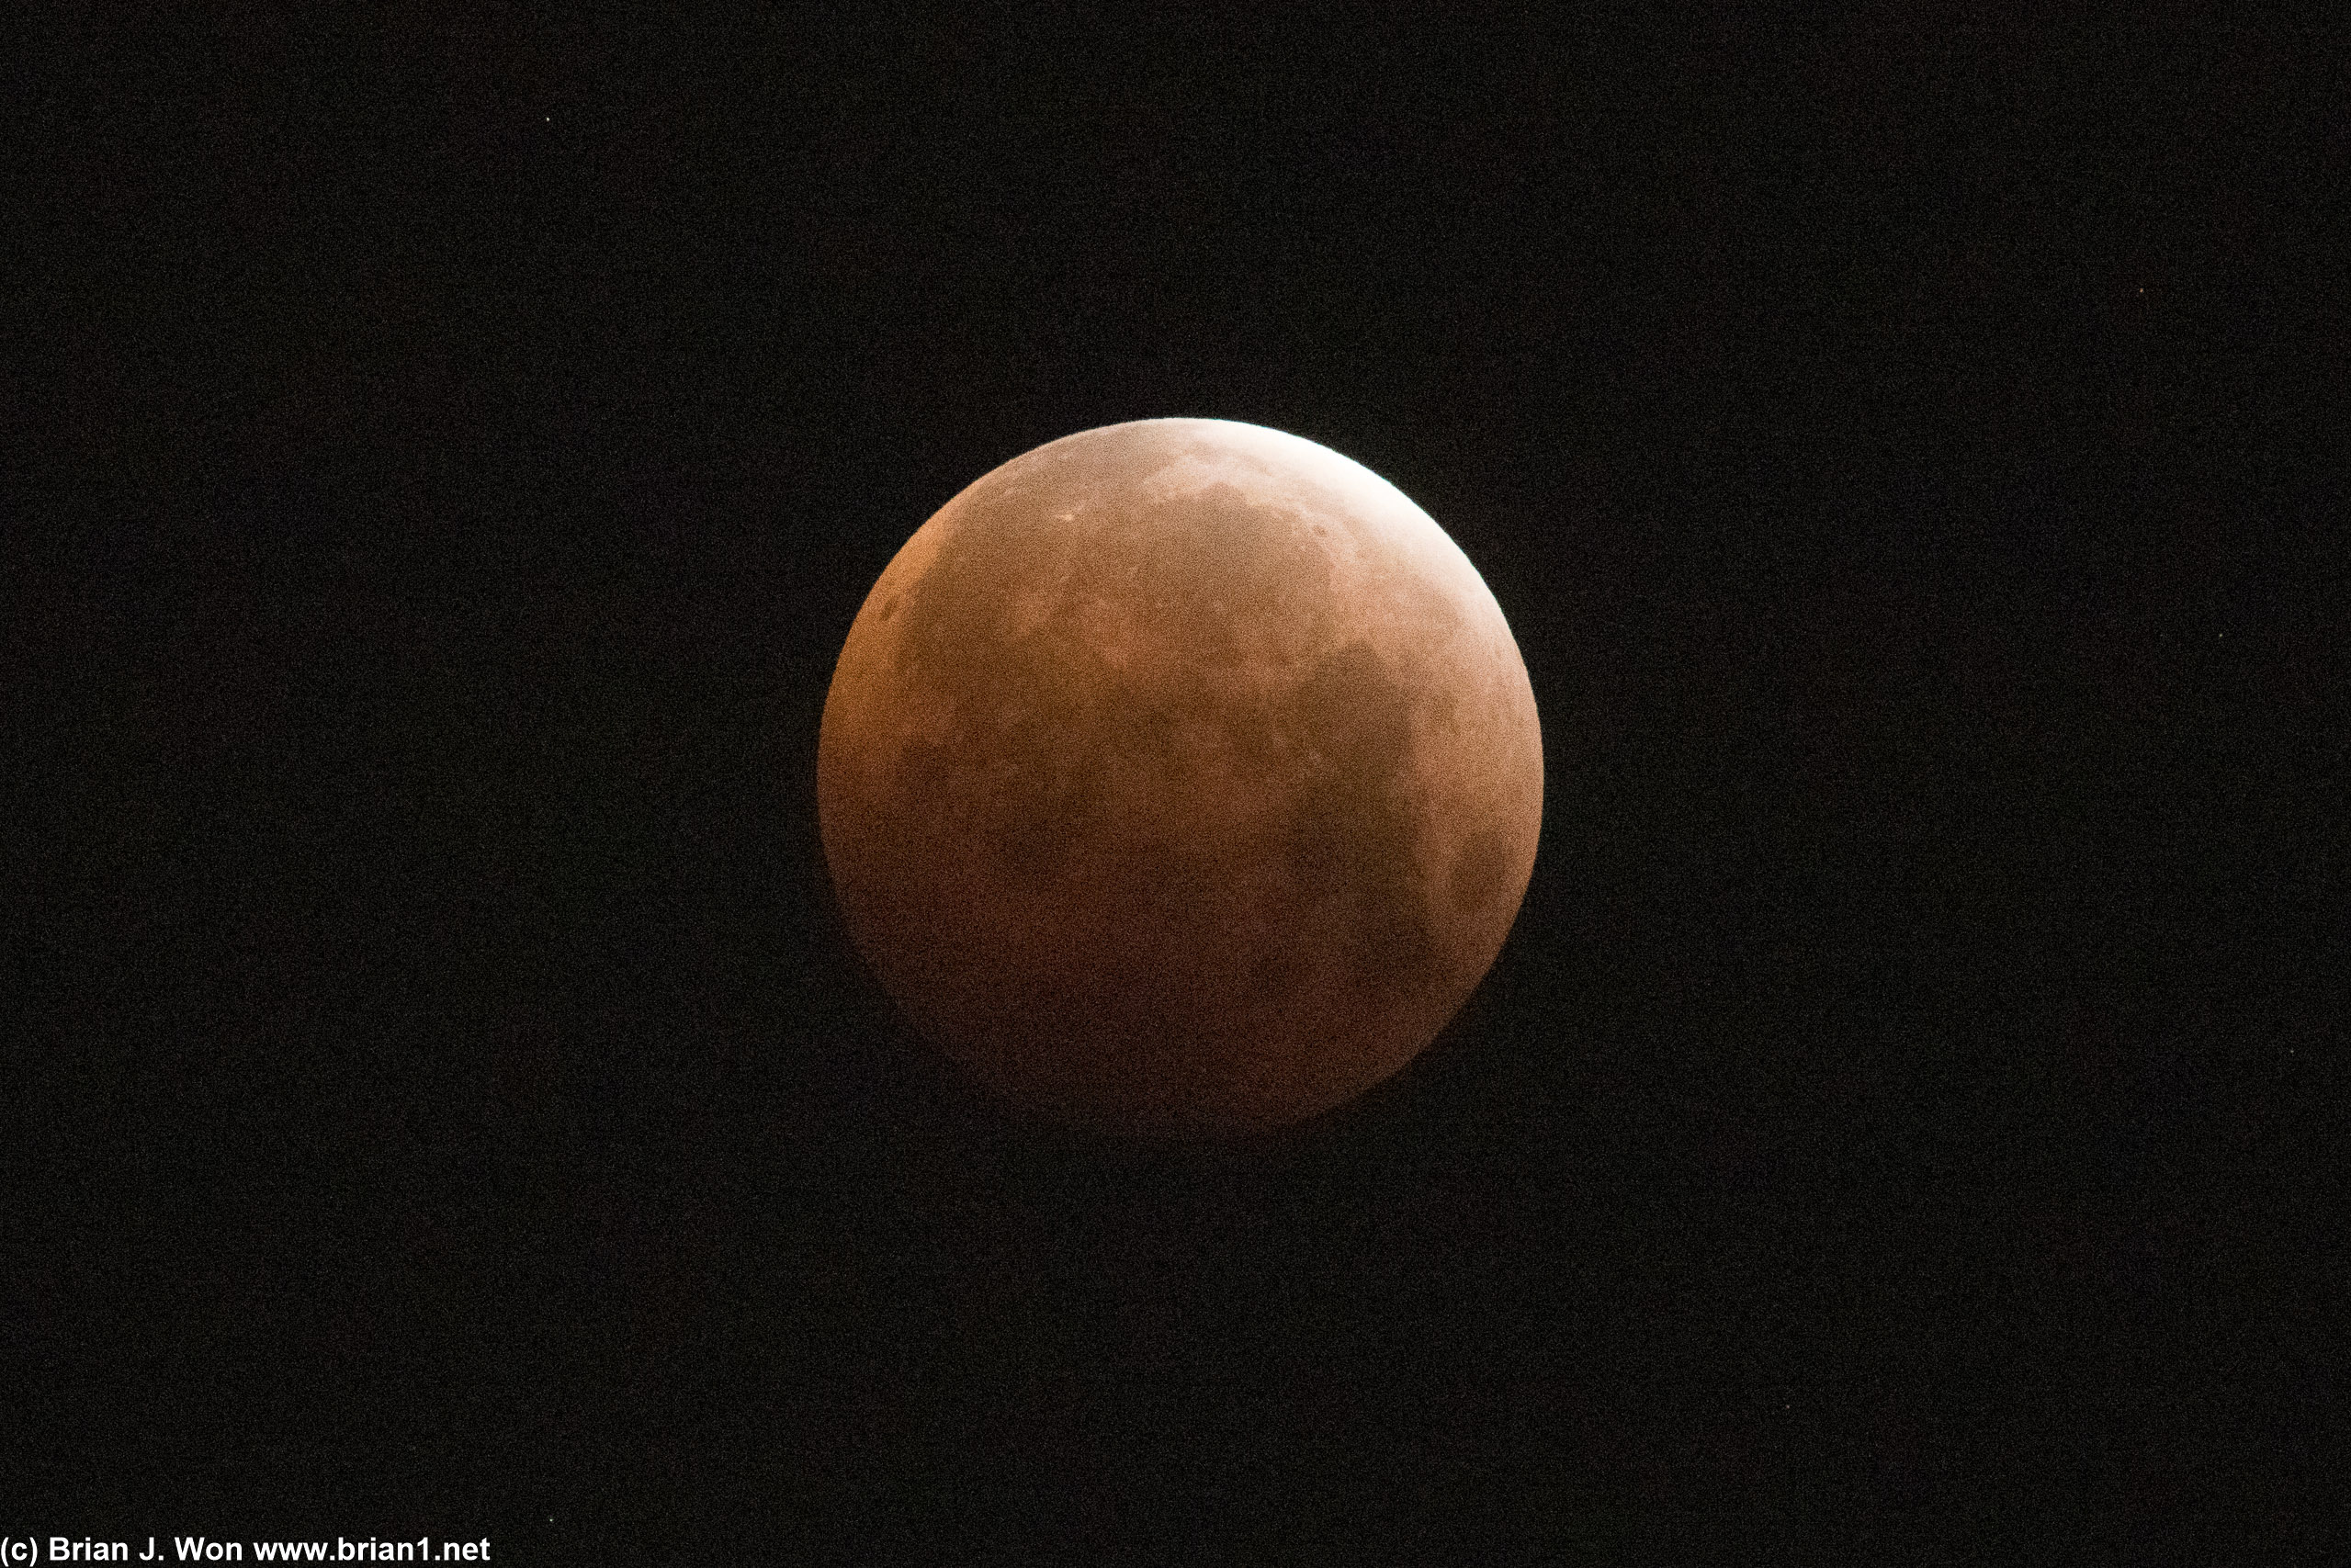 Maybe next time I'll rent a telescope instead of "just" a 600mm lens.